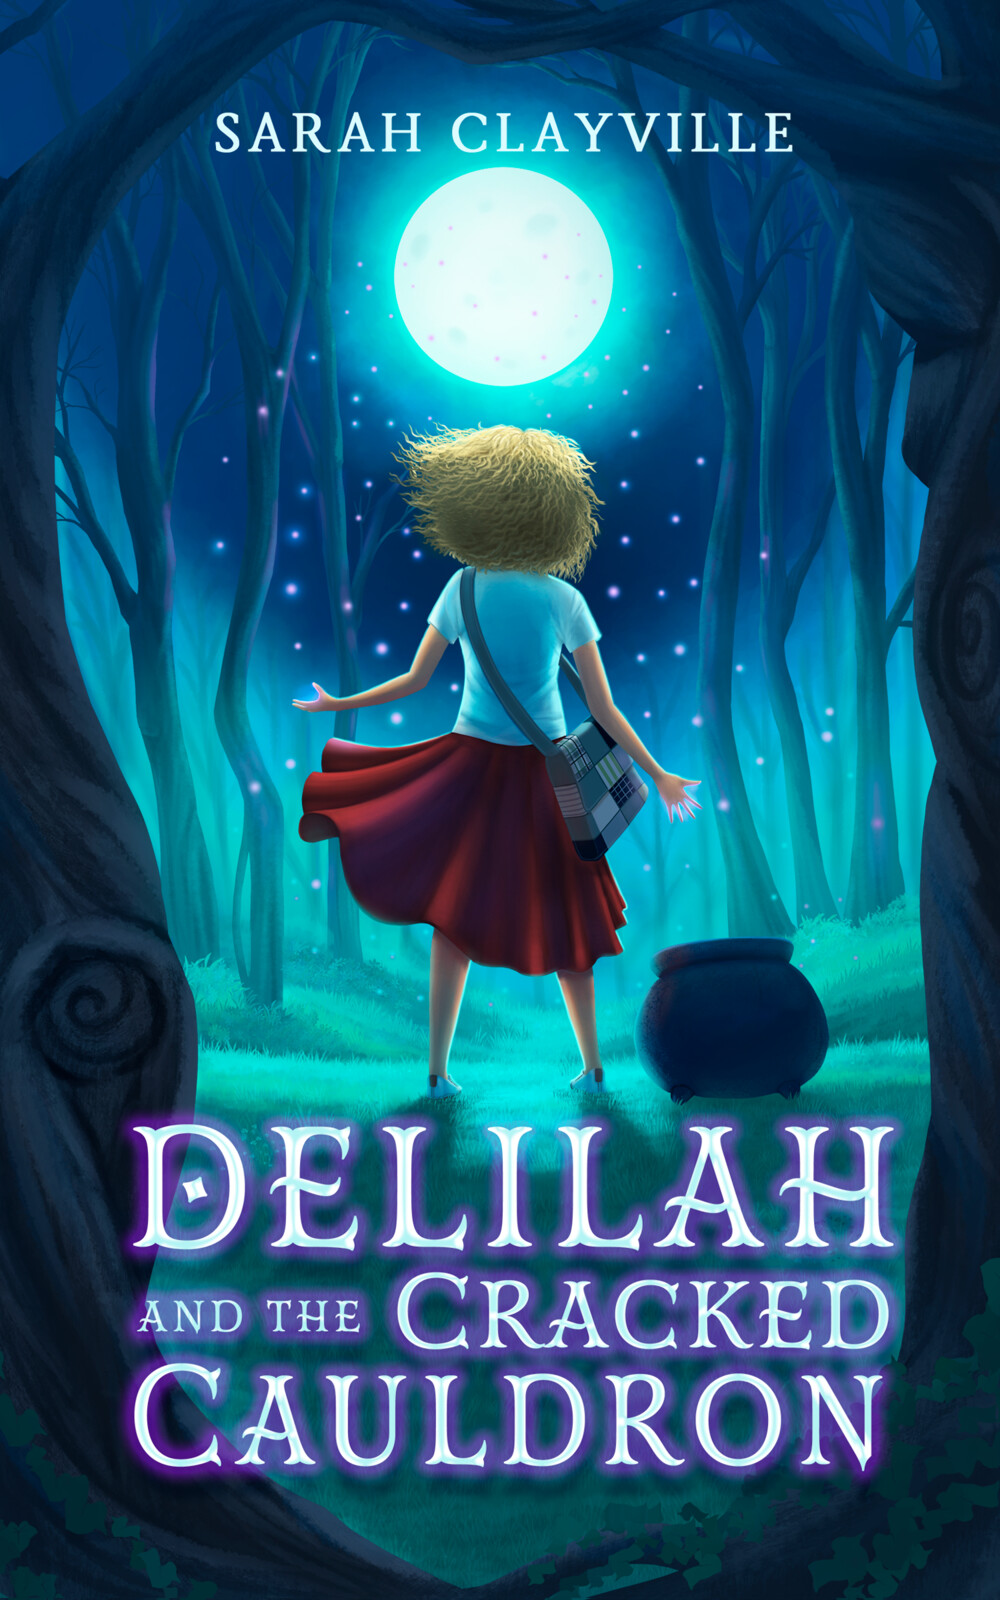 Delilah and the Cracked Cauldron